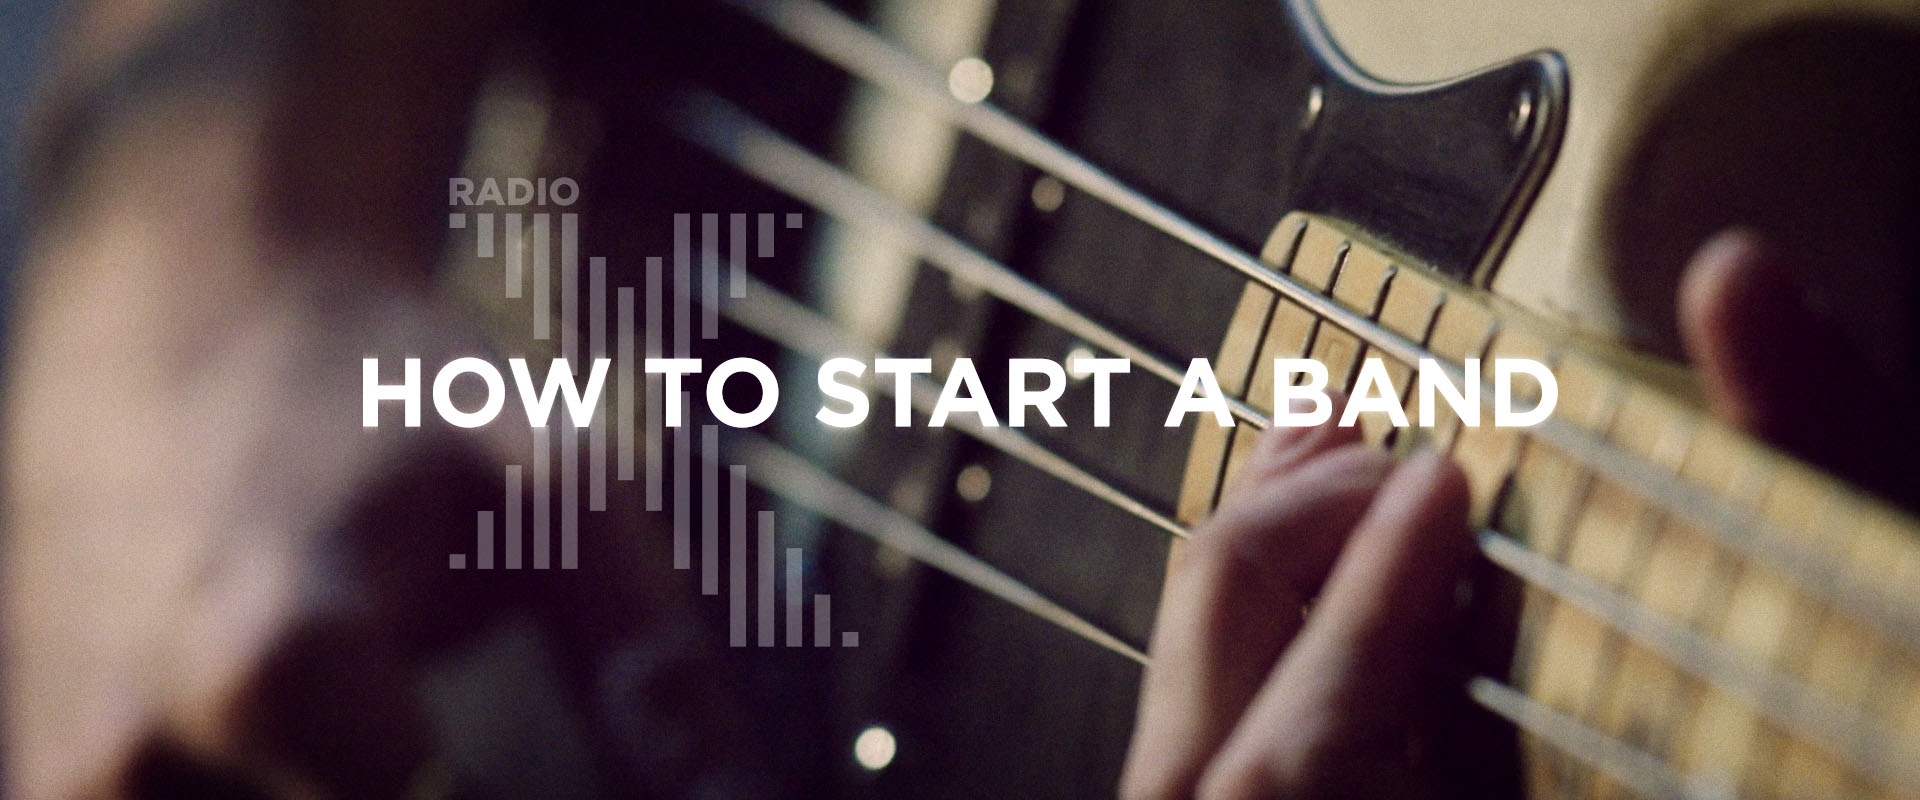 How to Start a Band